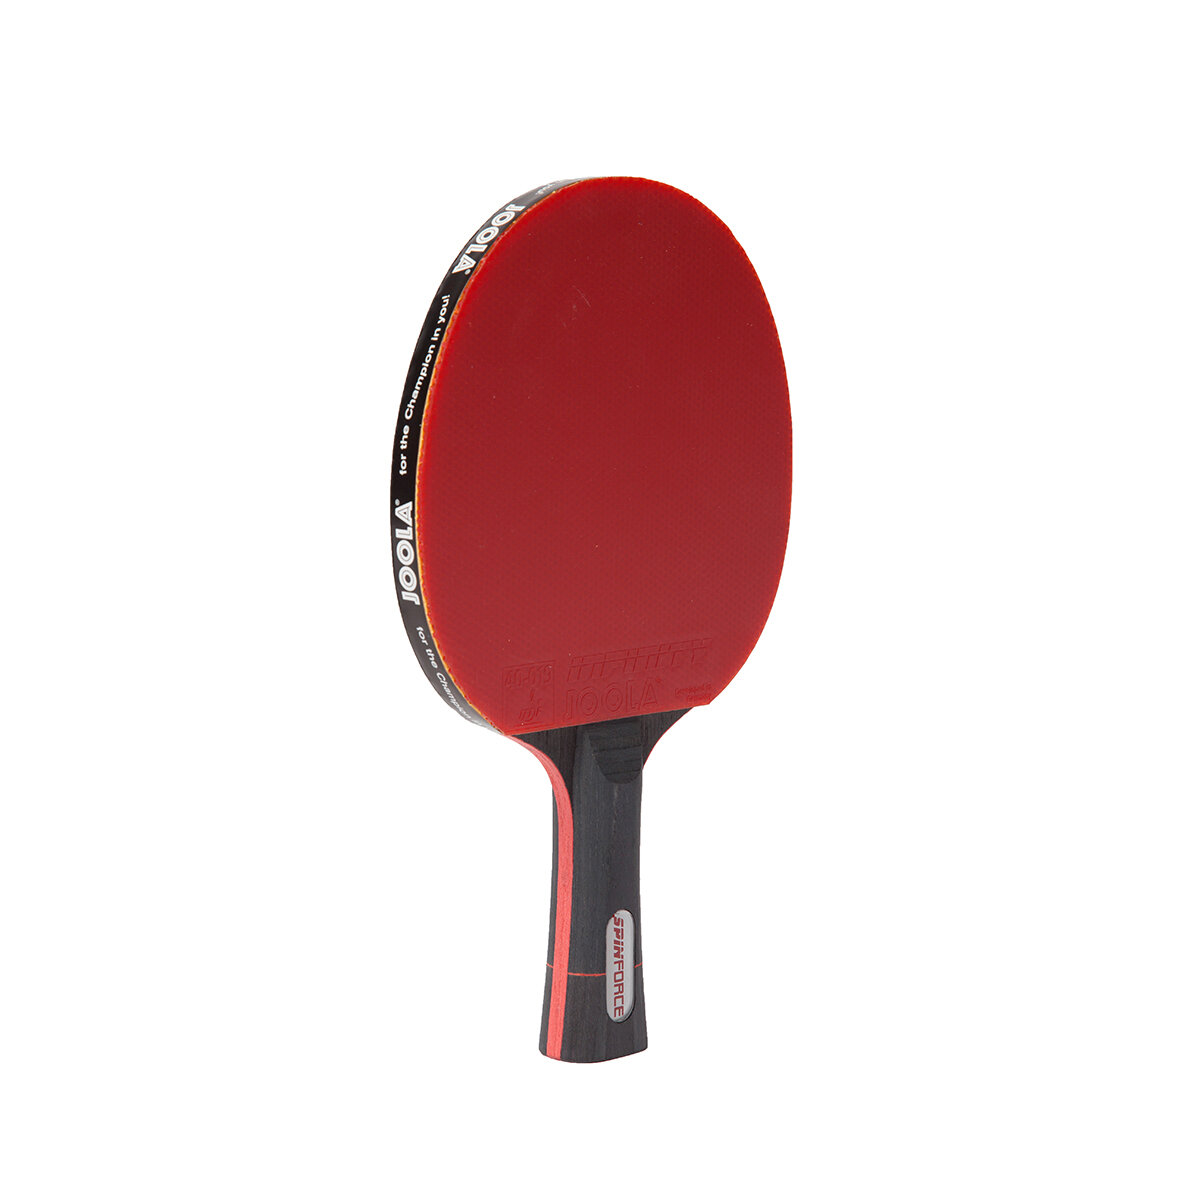 ITTF Approved Table Tennis Bat Professional Pro Pingpong Racket Paddle & Case 